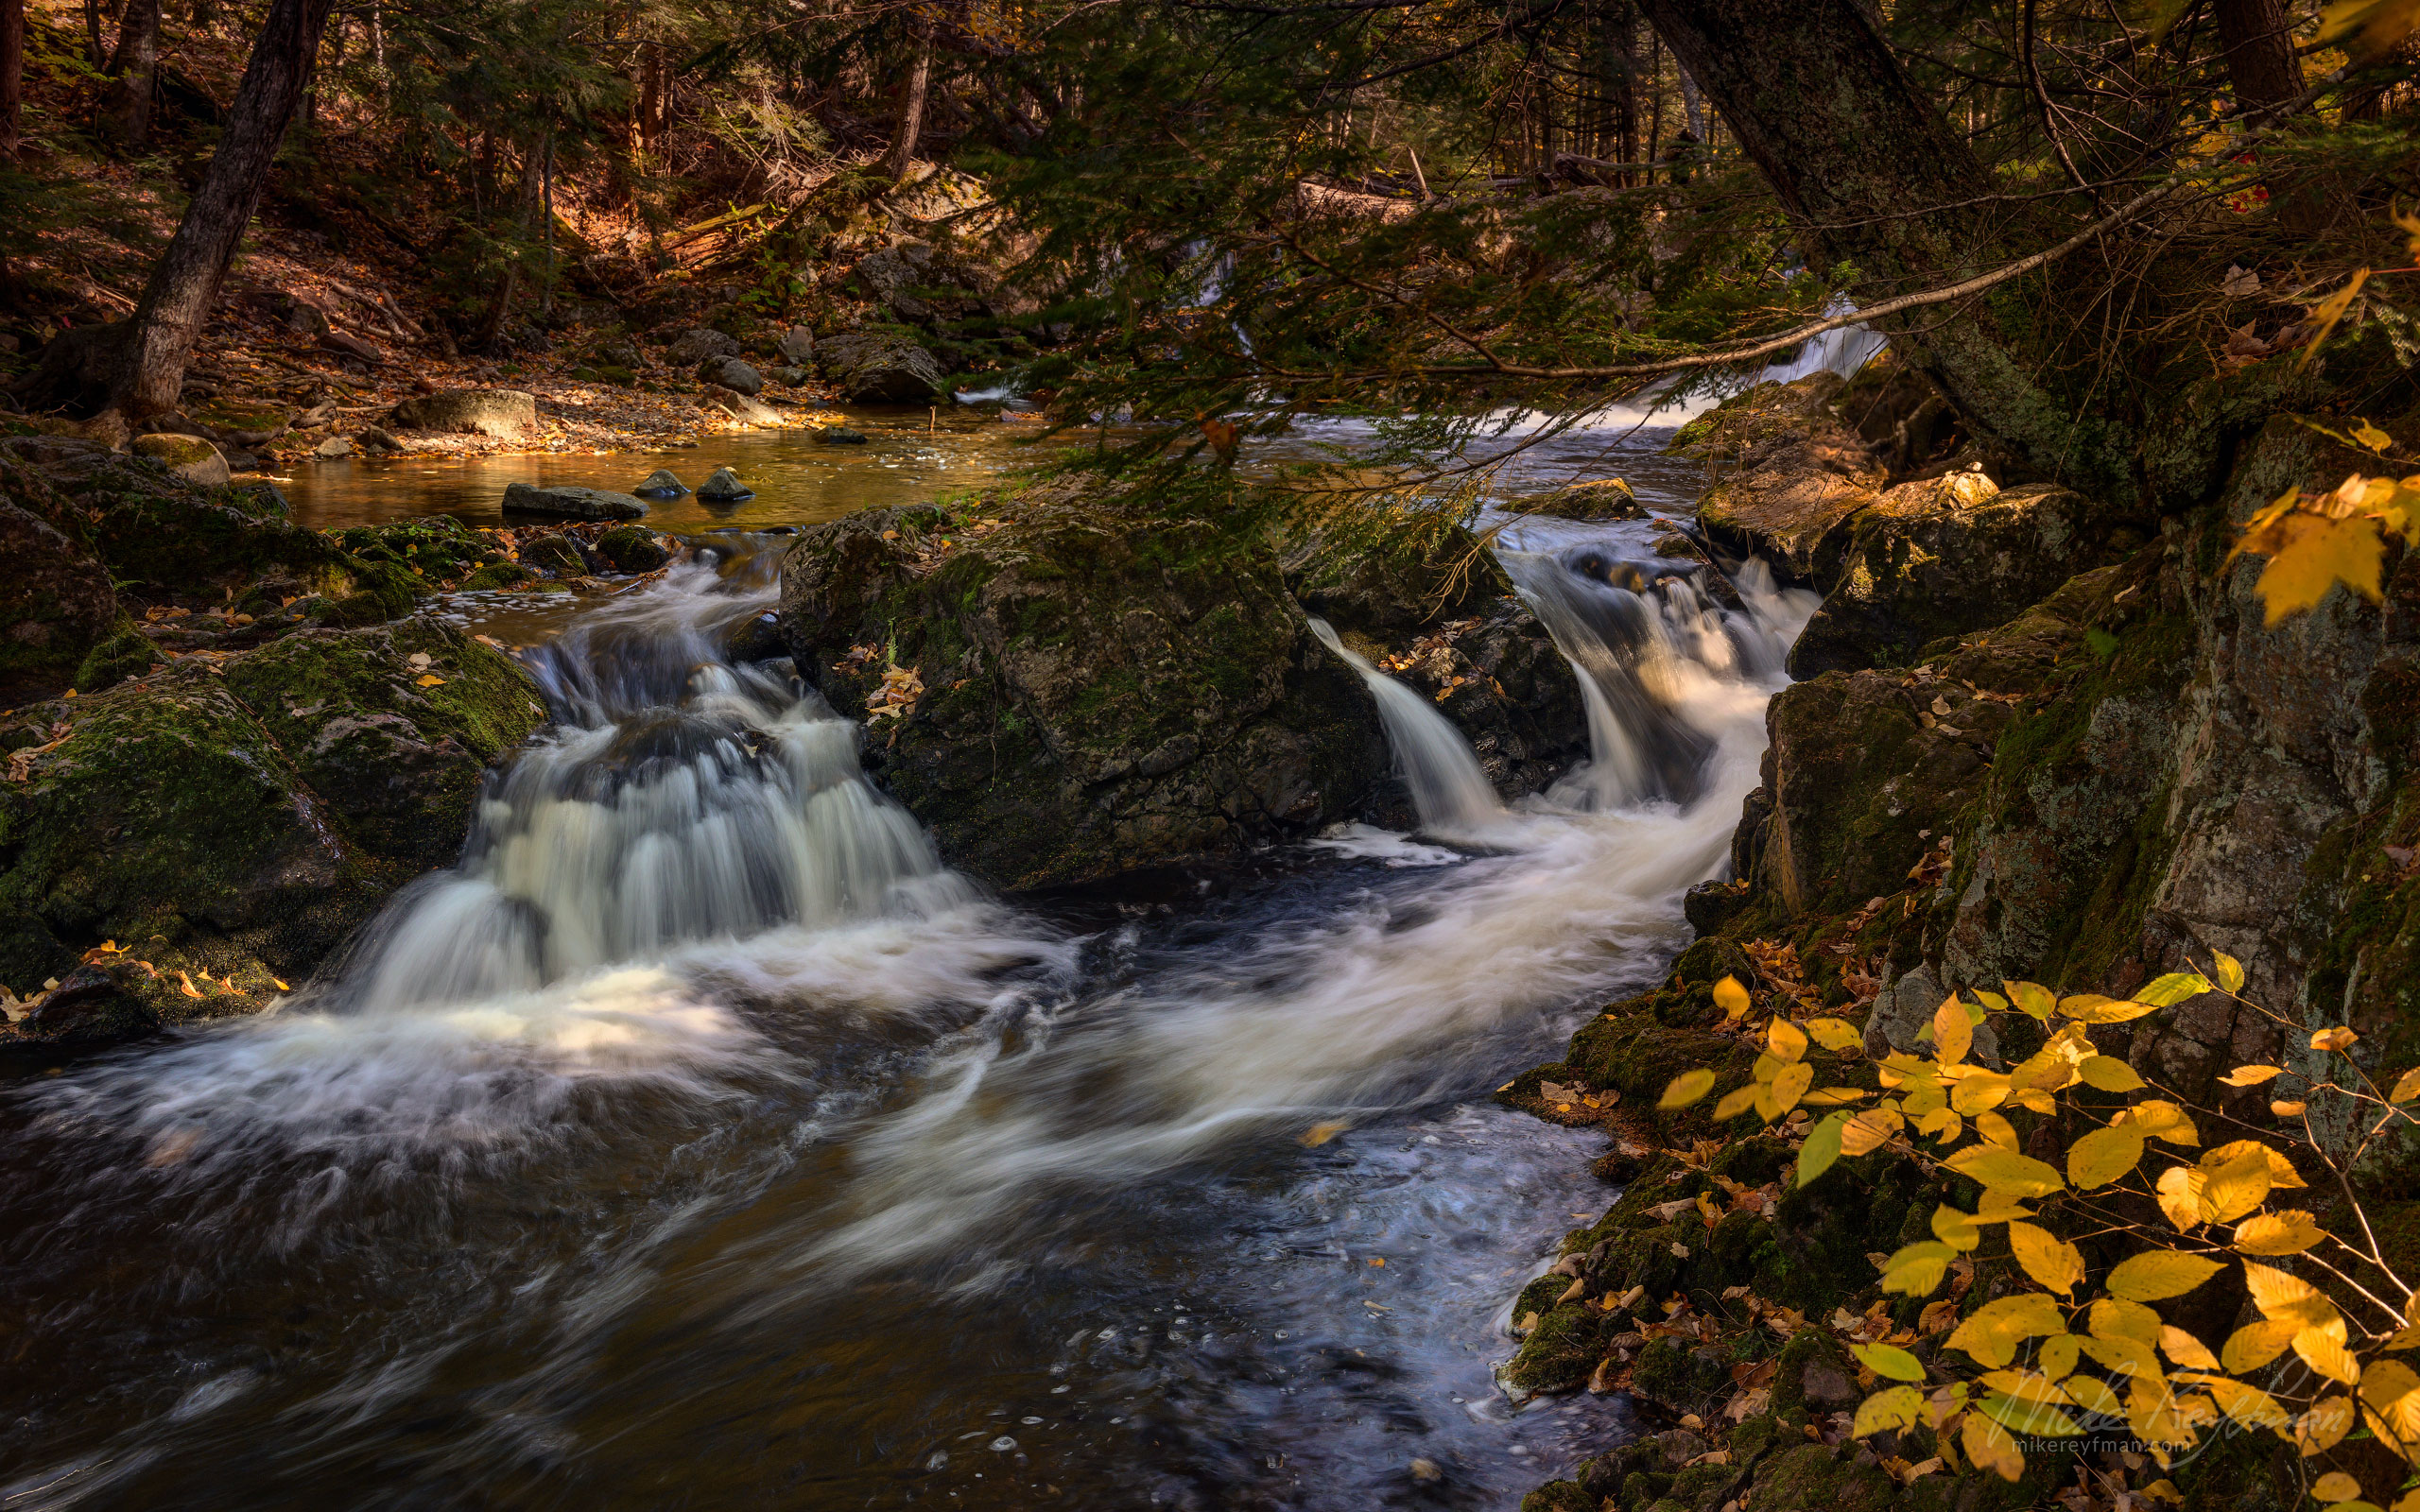 Overlooked Falls, Little Carp River, Porcupine Mountains, Upper Peninsula, Michigan, USA UP-MI_058_ZRA7416.jpg - Michigan's Upper Peninsula - the best destination in US for fall colors. - Mike Reyfman Photography